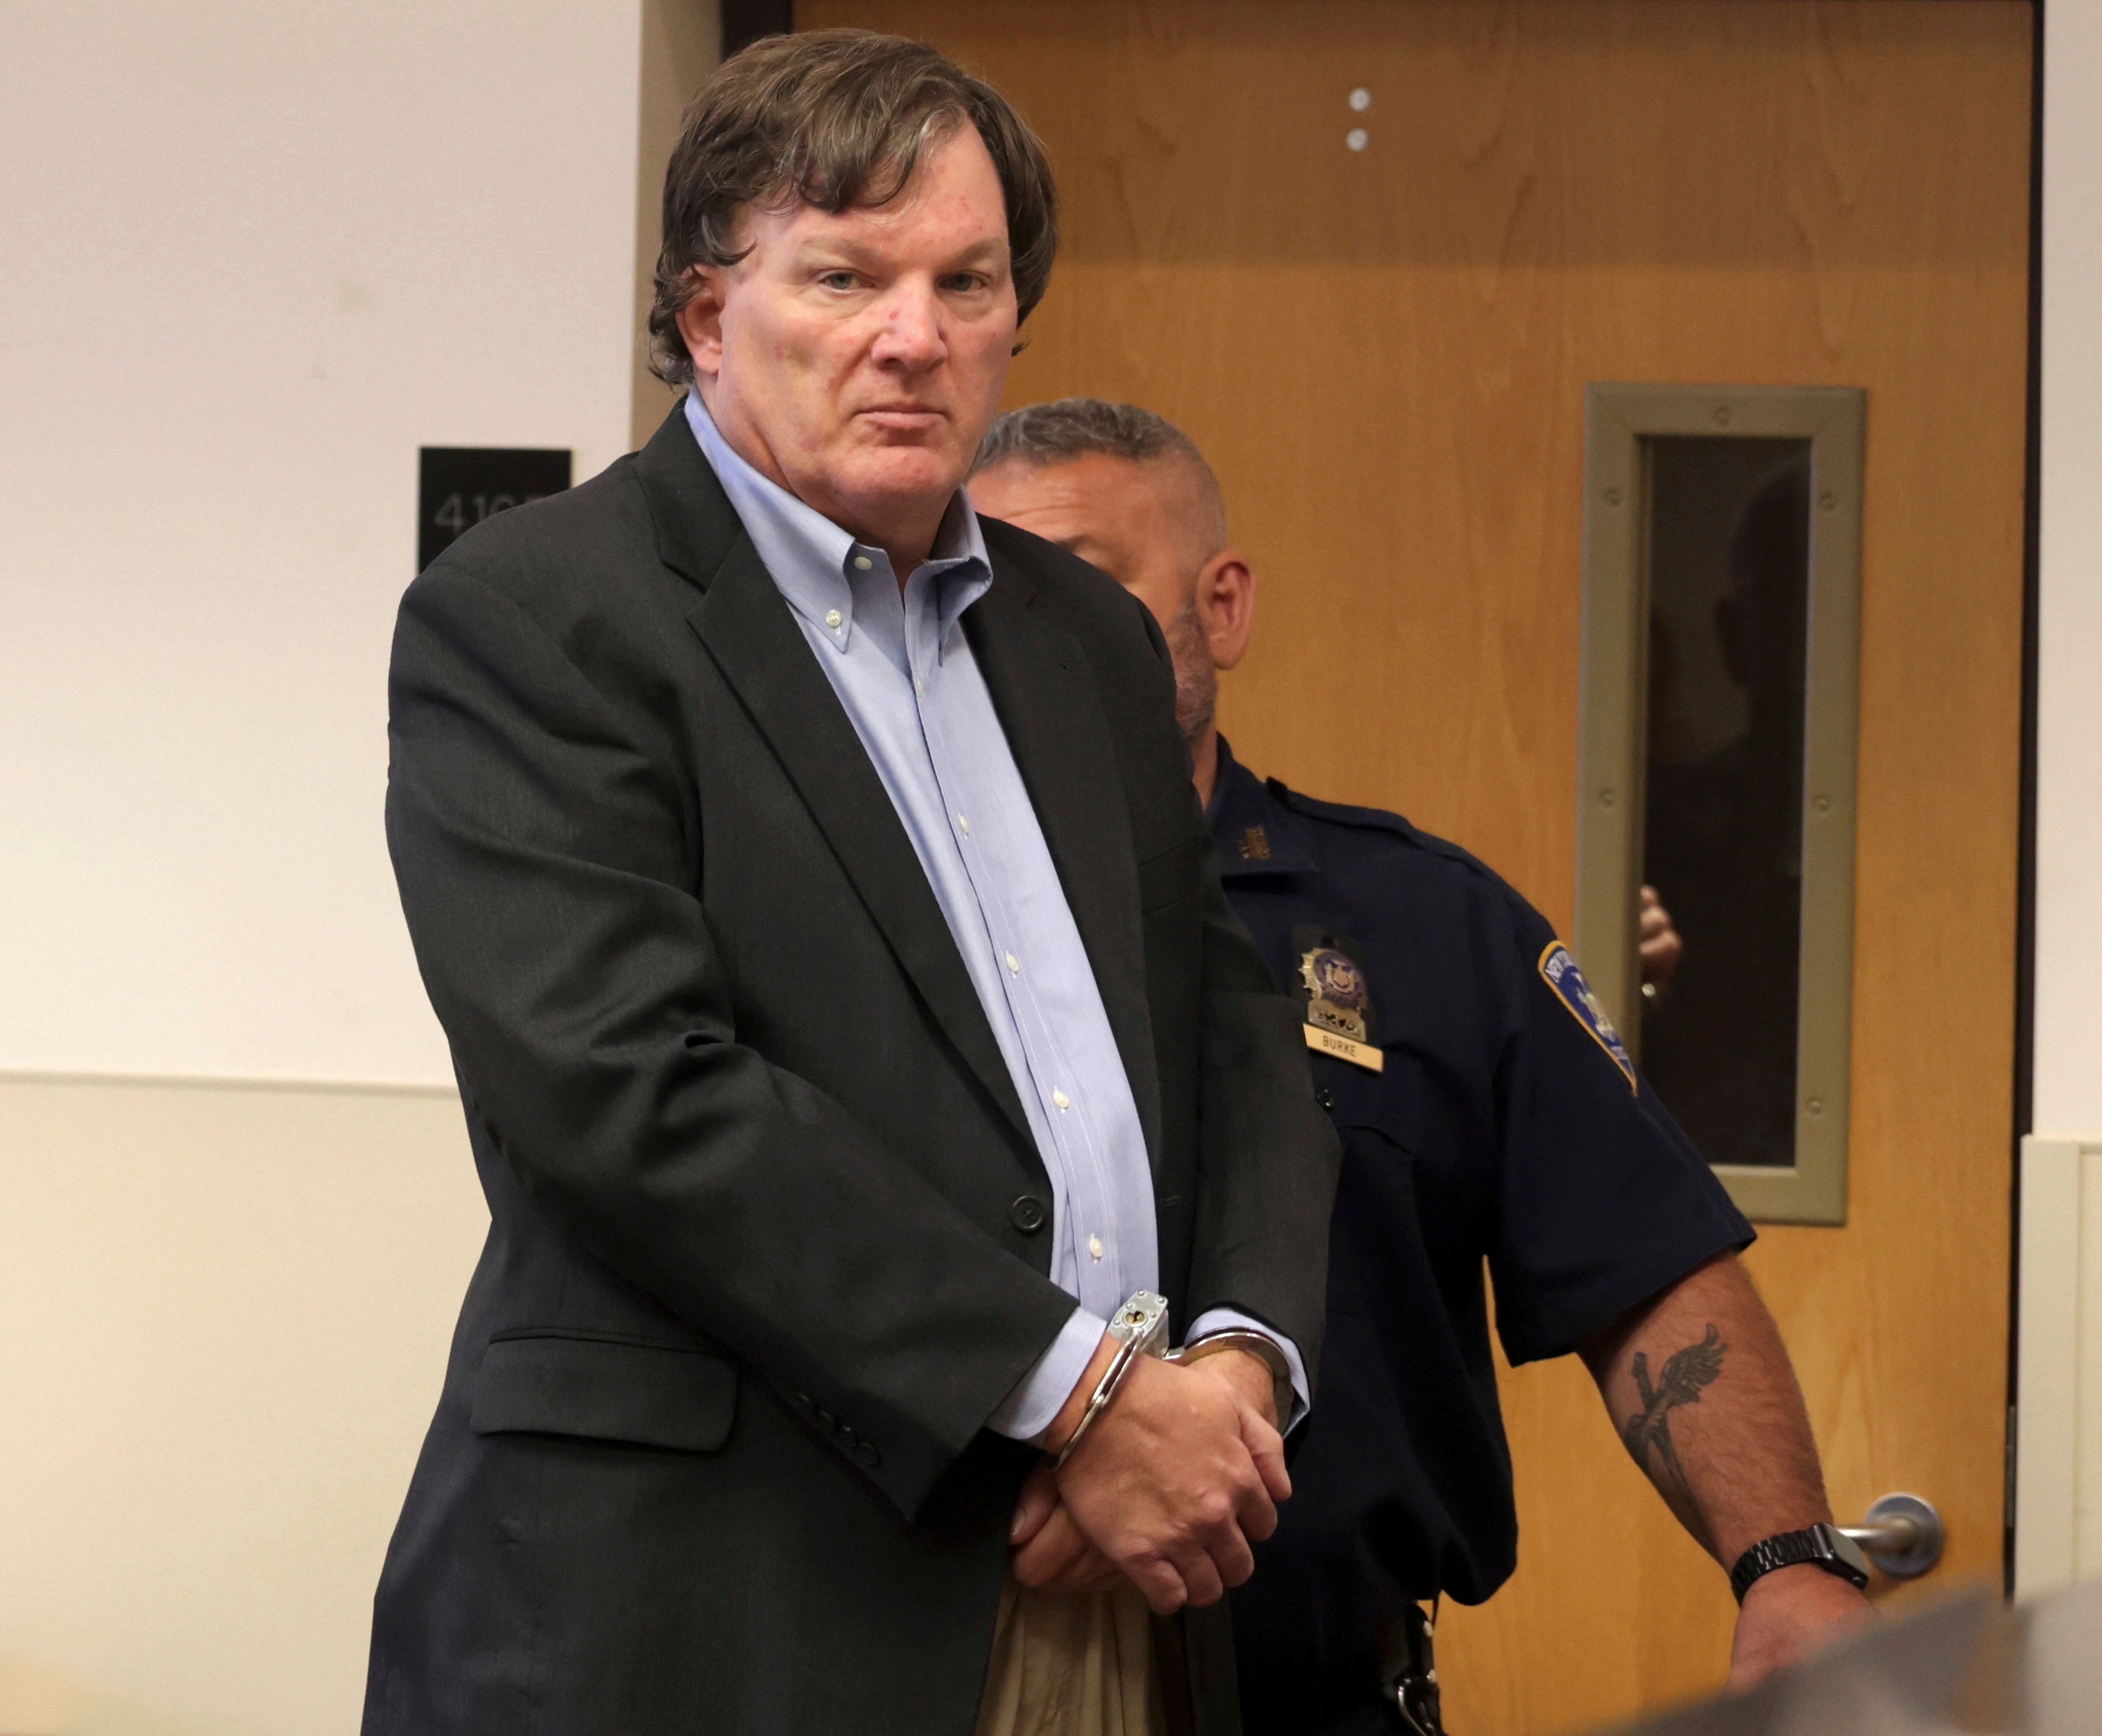 Rex A Heuermann, the architect accused of murdering at least three women near Long Island’s Gilgo Beach, appears in Suffolk County Court on Tuesday